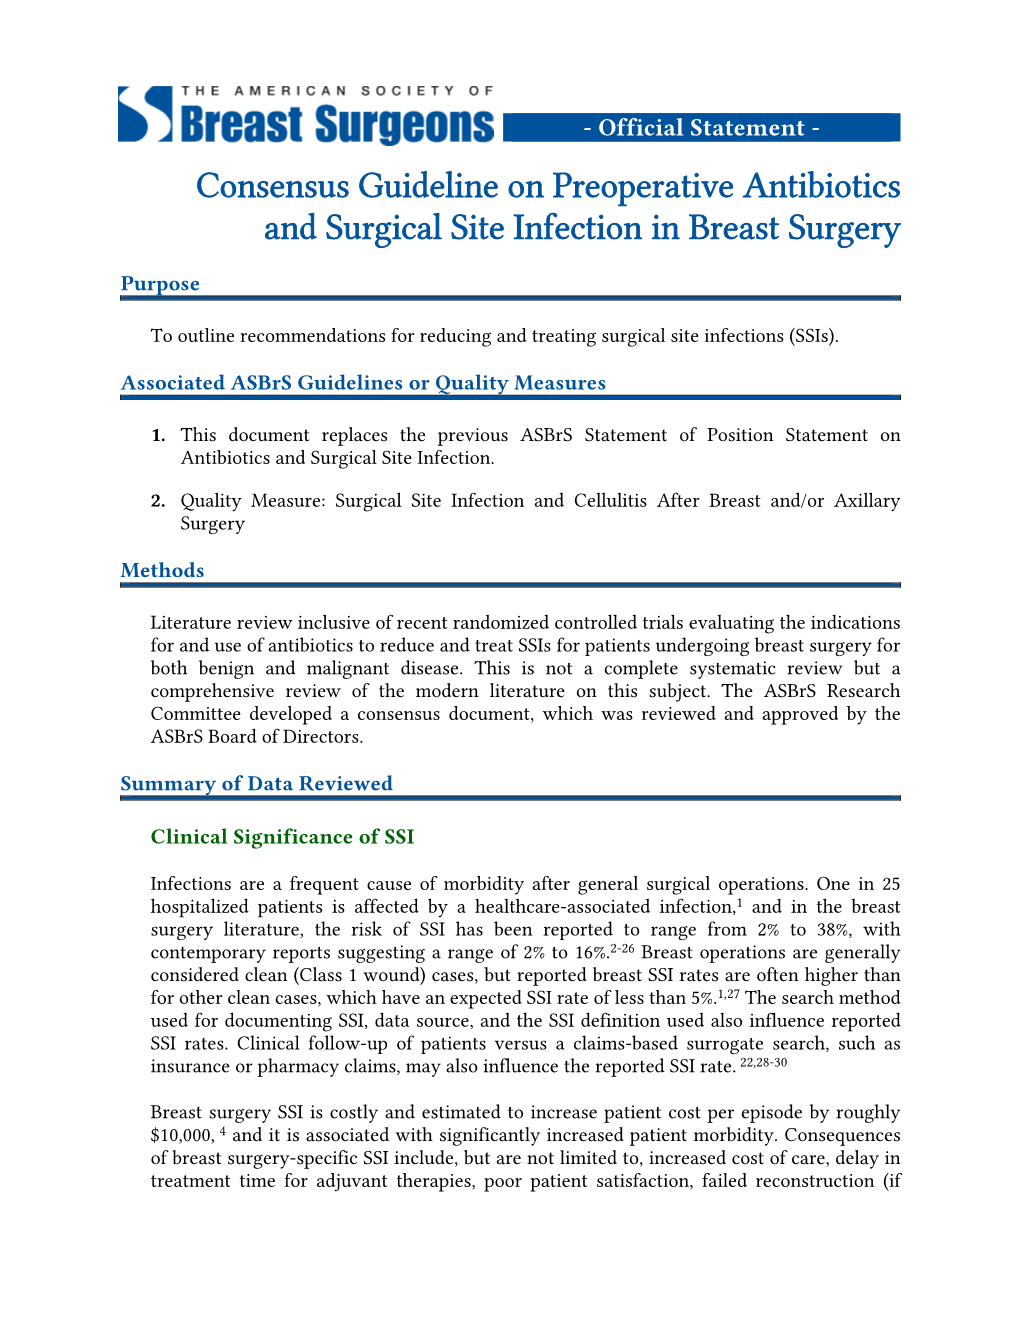 Consensus Guideline on Preoperative Antibiotics and Surgical Site Infection in Breast Surgery